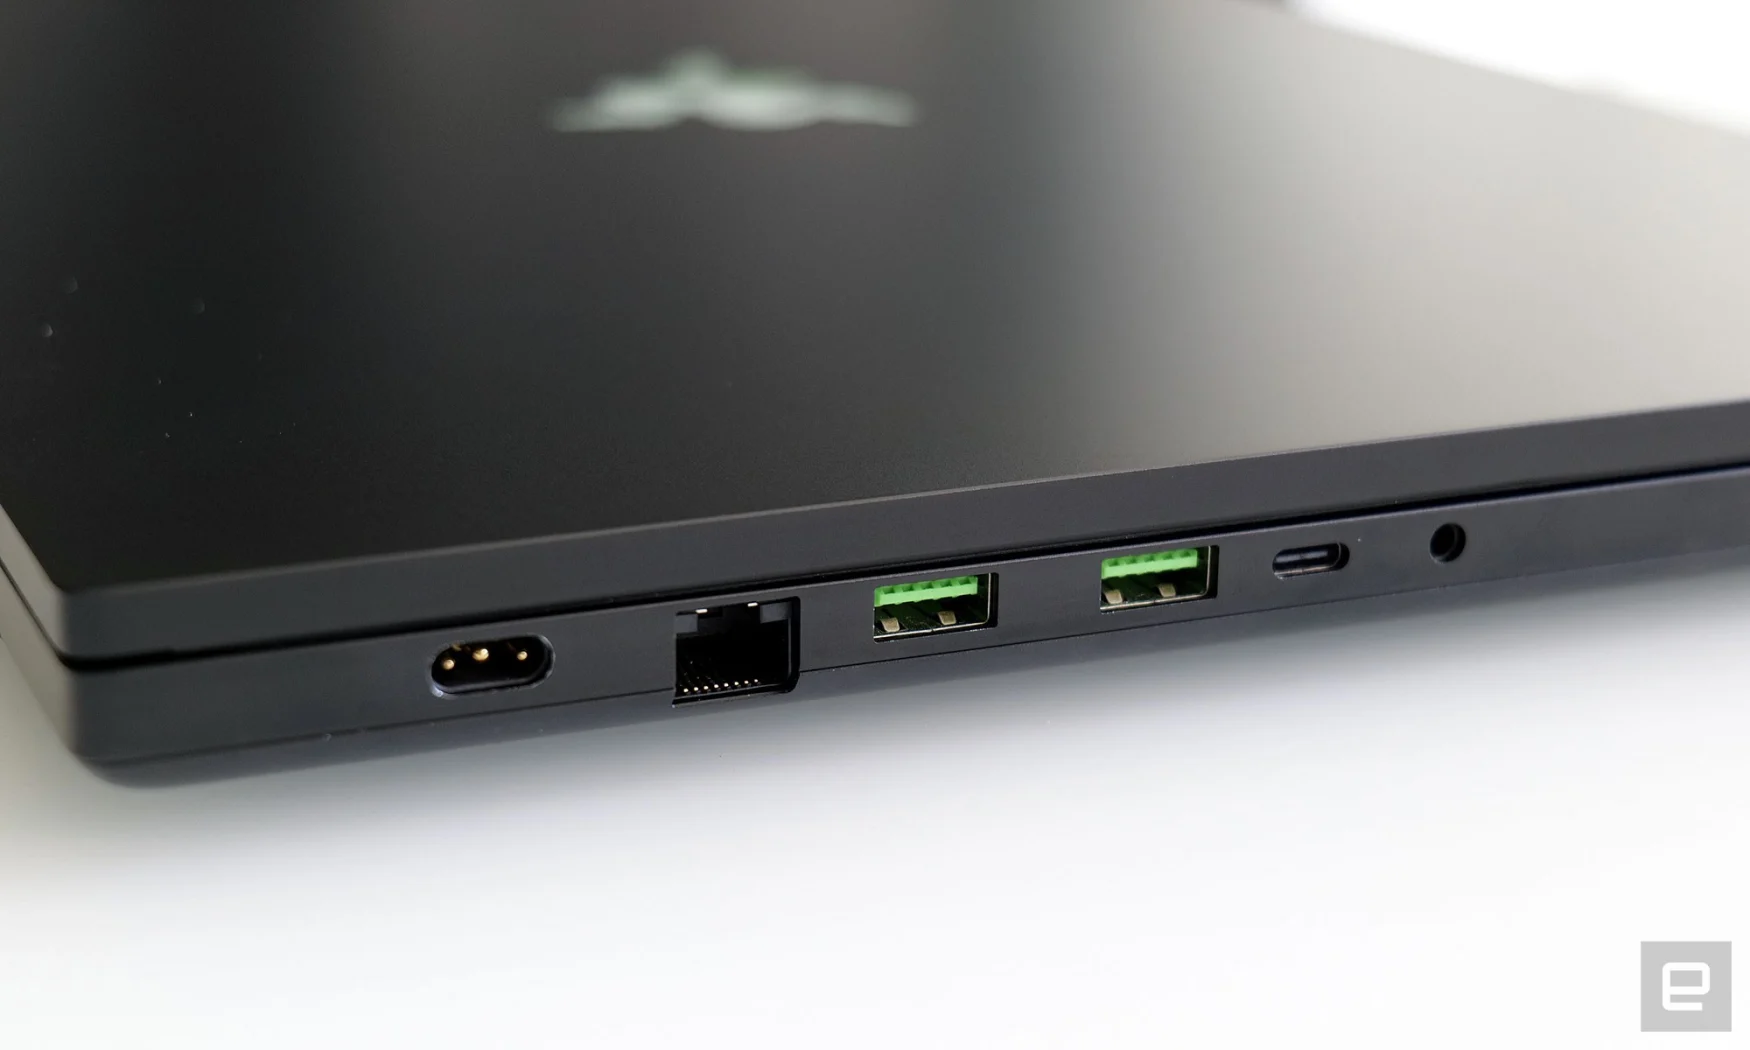 The Blade 18 even comes with an Ethernet jack and multiple USB Type-A and Type-C ports so you don't really need to carry a dongle or dock around. 